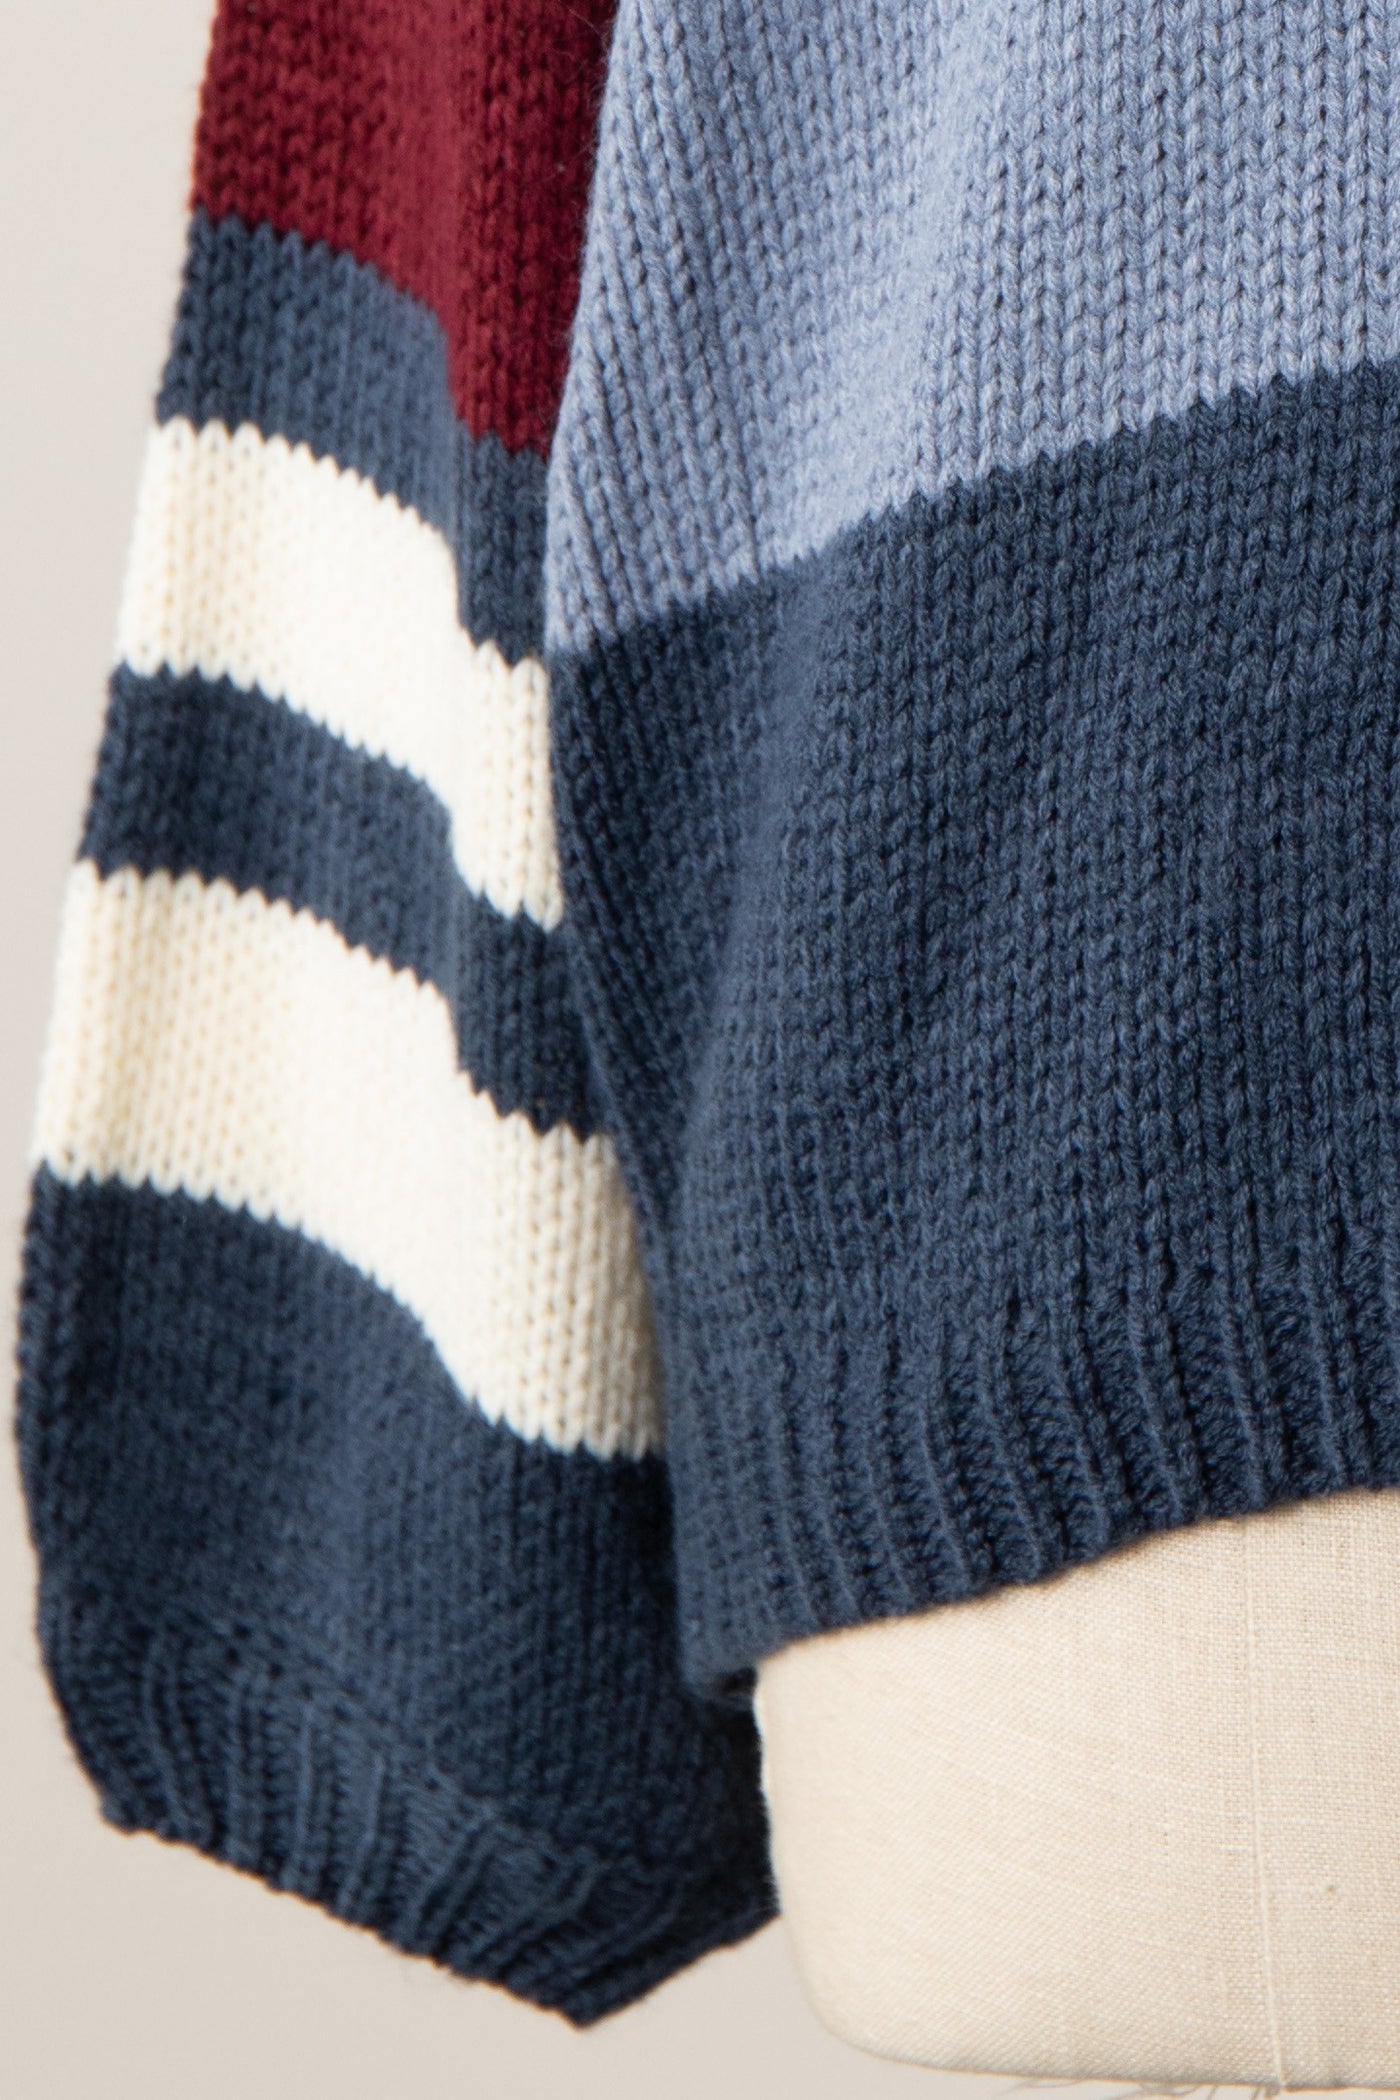 ALPINE CABLE KNIT SWEATER